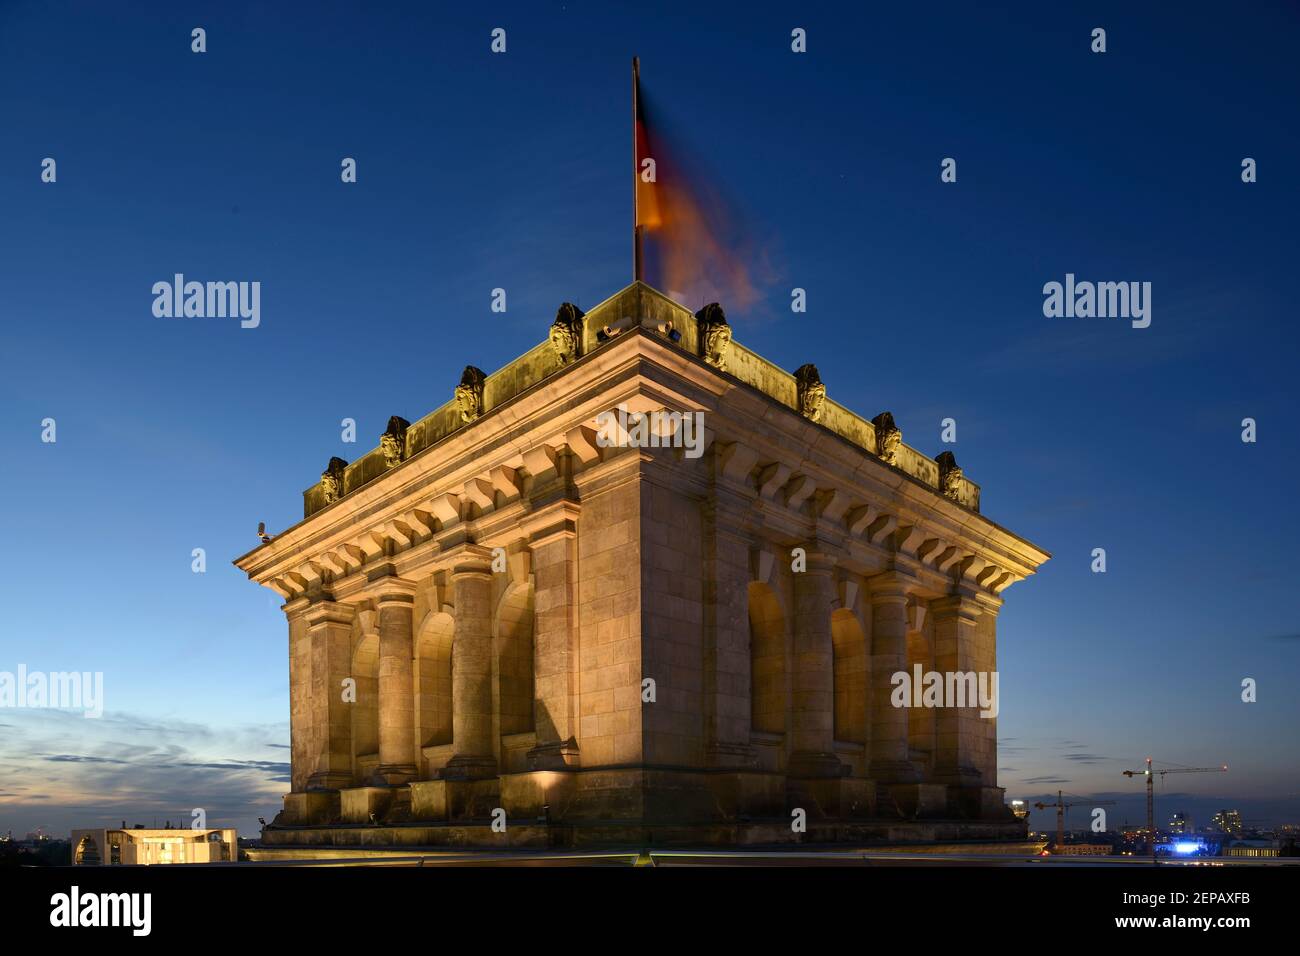 A German flag flying on a corner of the Reichstag building in Berlin, Germany. Stock Photo